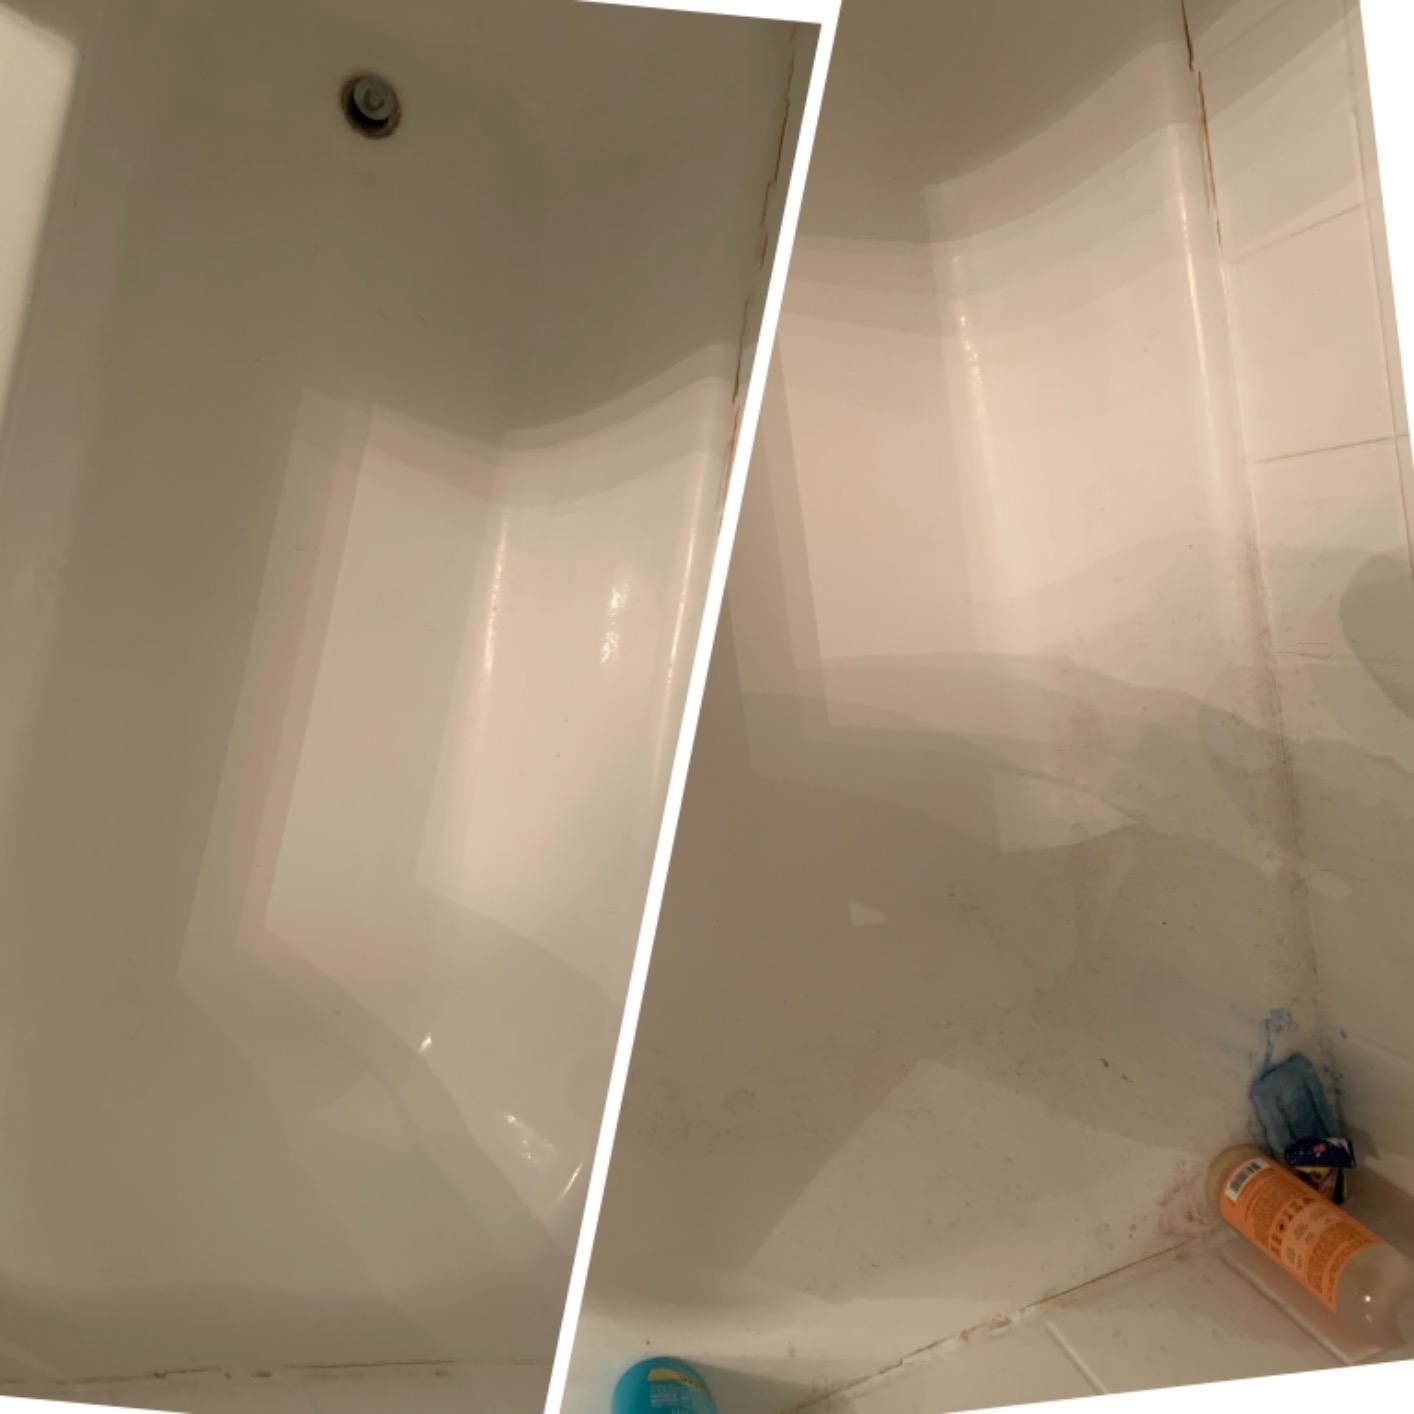 A before and after of a reviewer&#x27;s tub looking grubby then cleaner